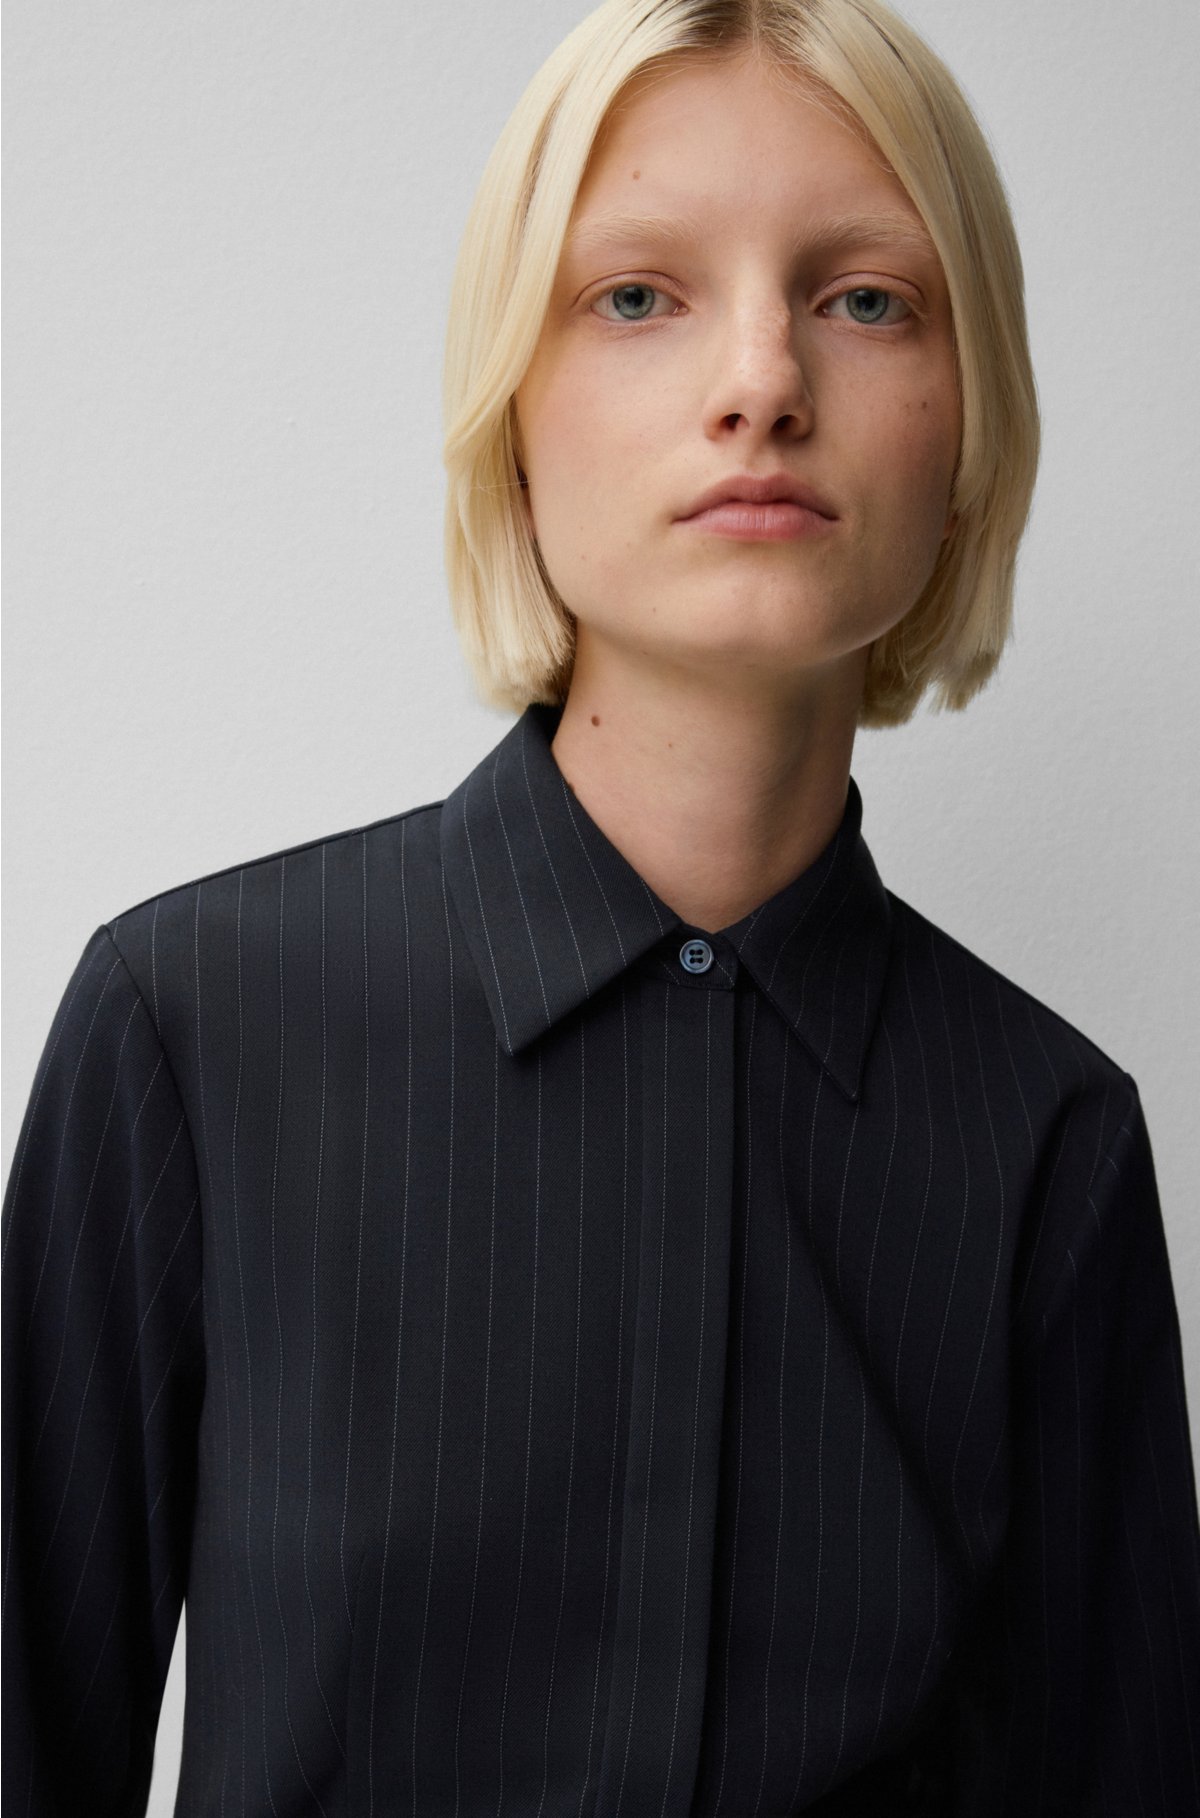 BOSS - Pinstriped bodysuit with shirt styling